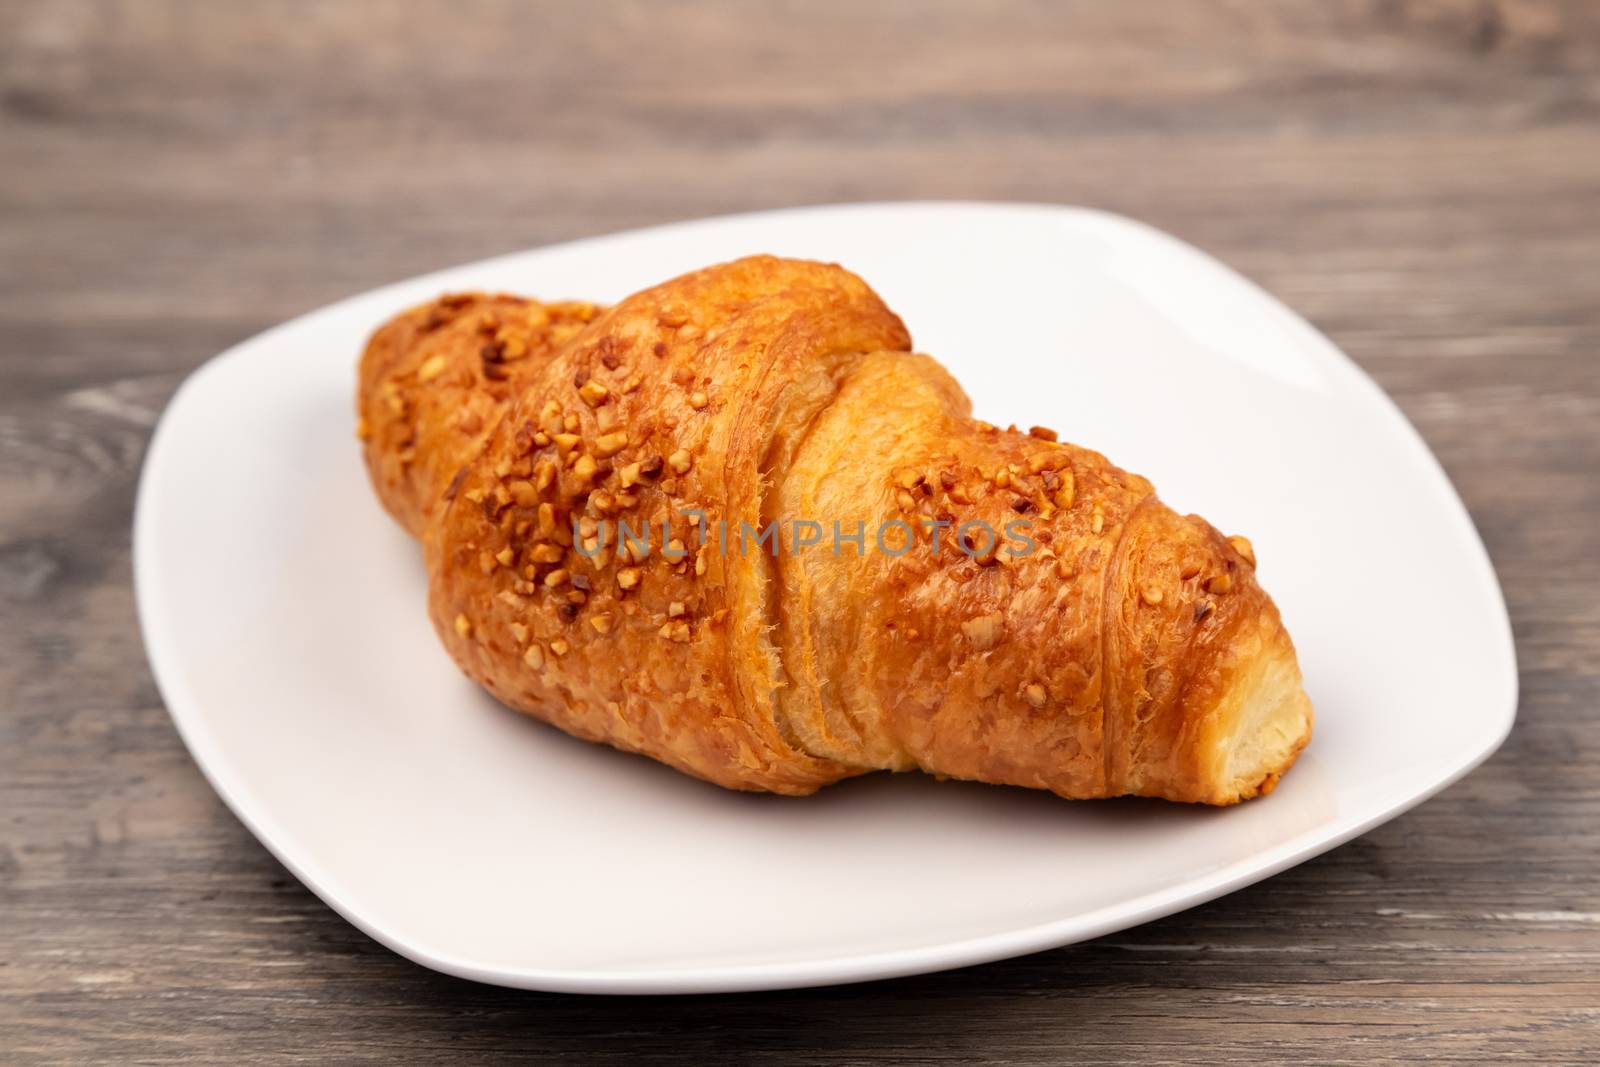 A delicious croissant on a plate by 25ehaag6